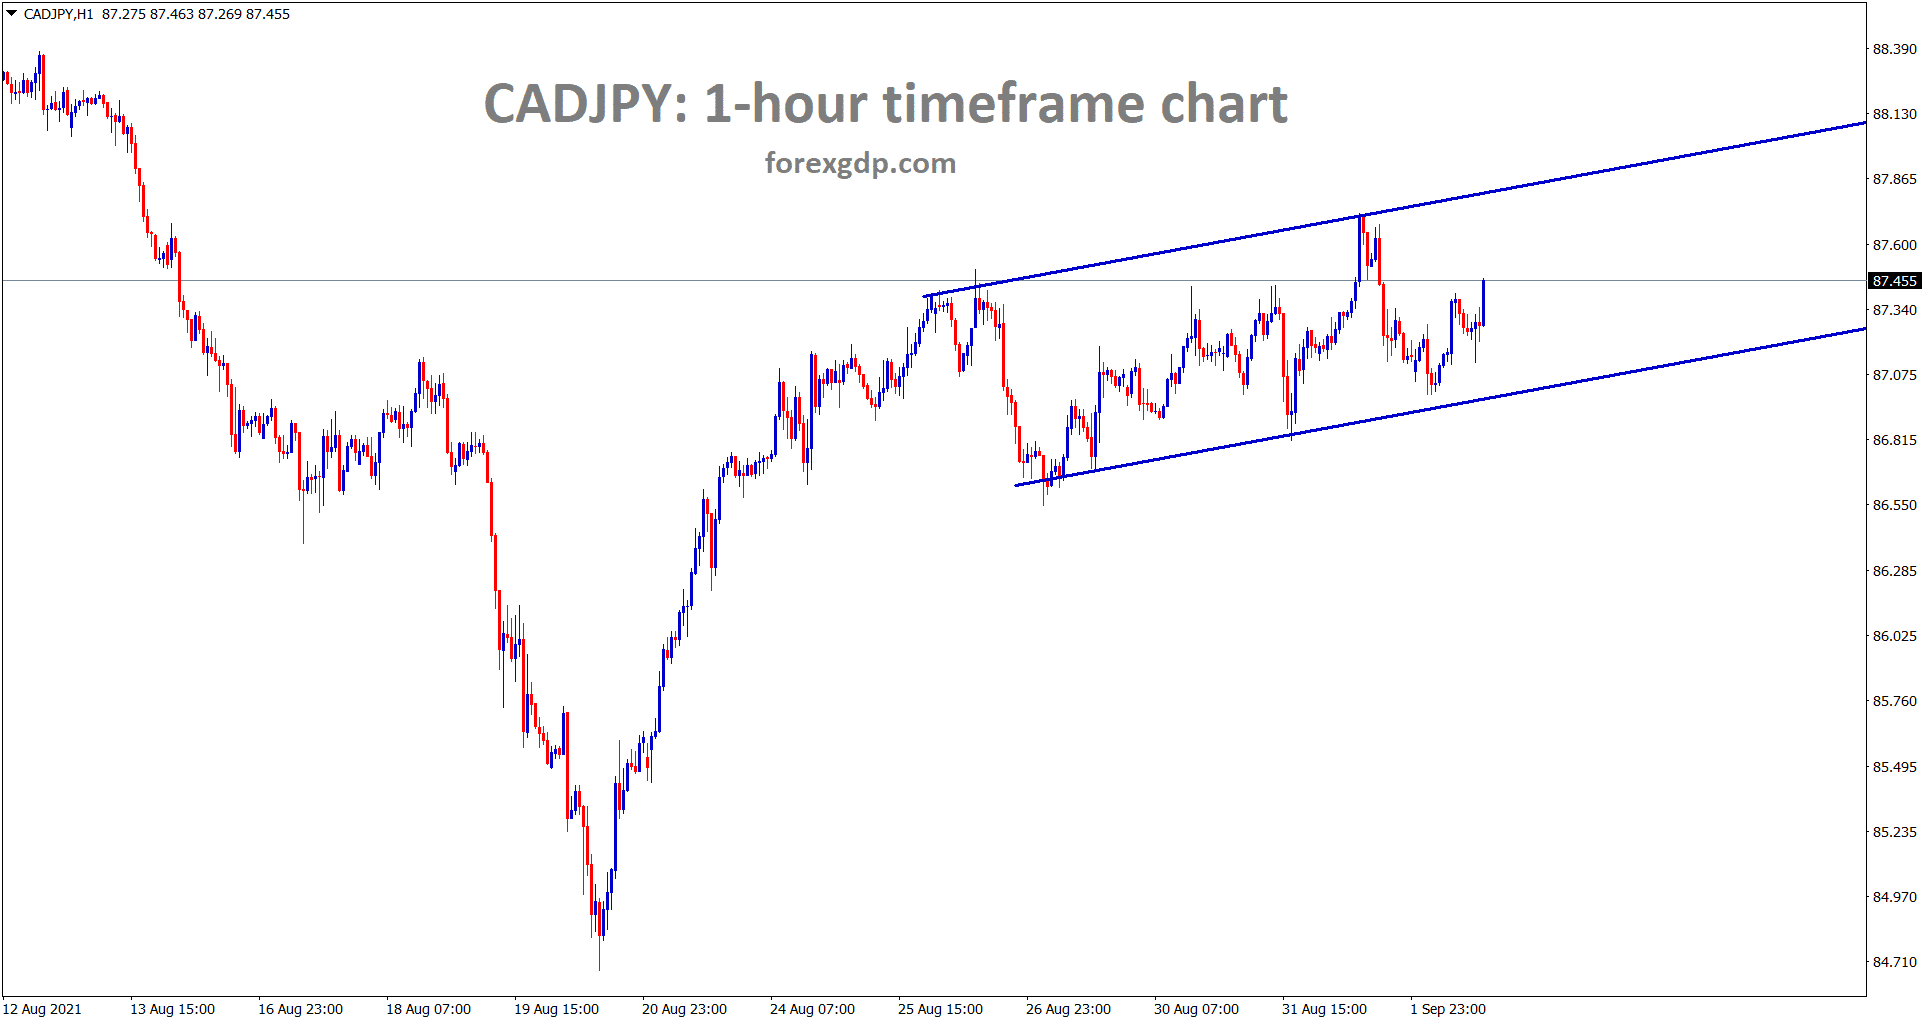 CADJPY is moving in a minor ascending channel range